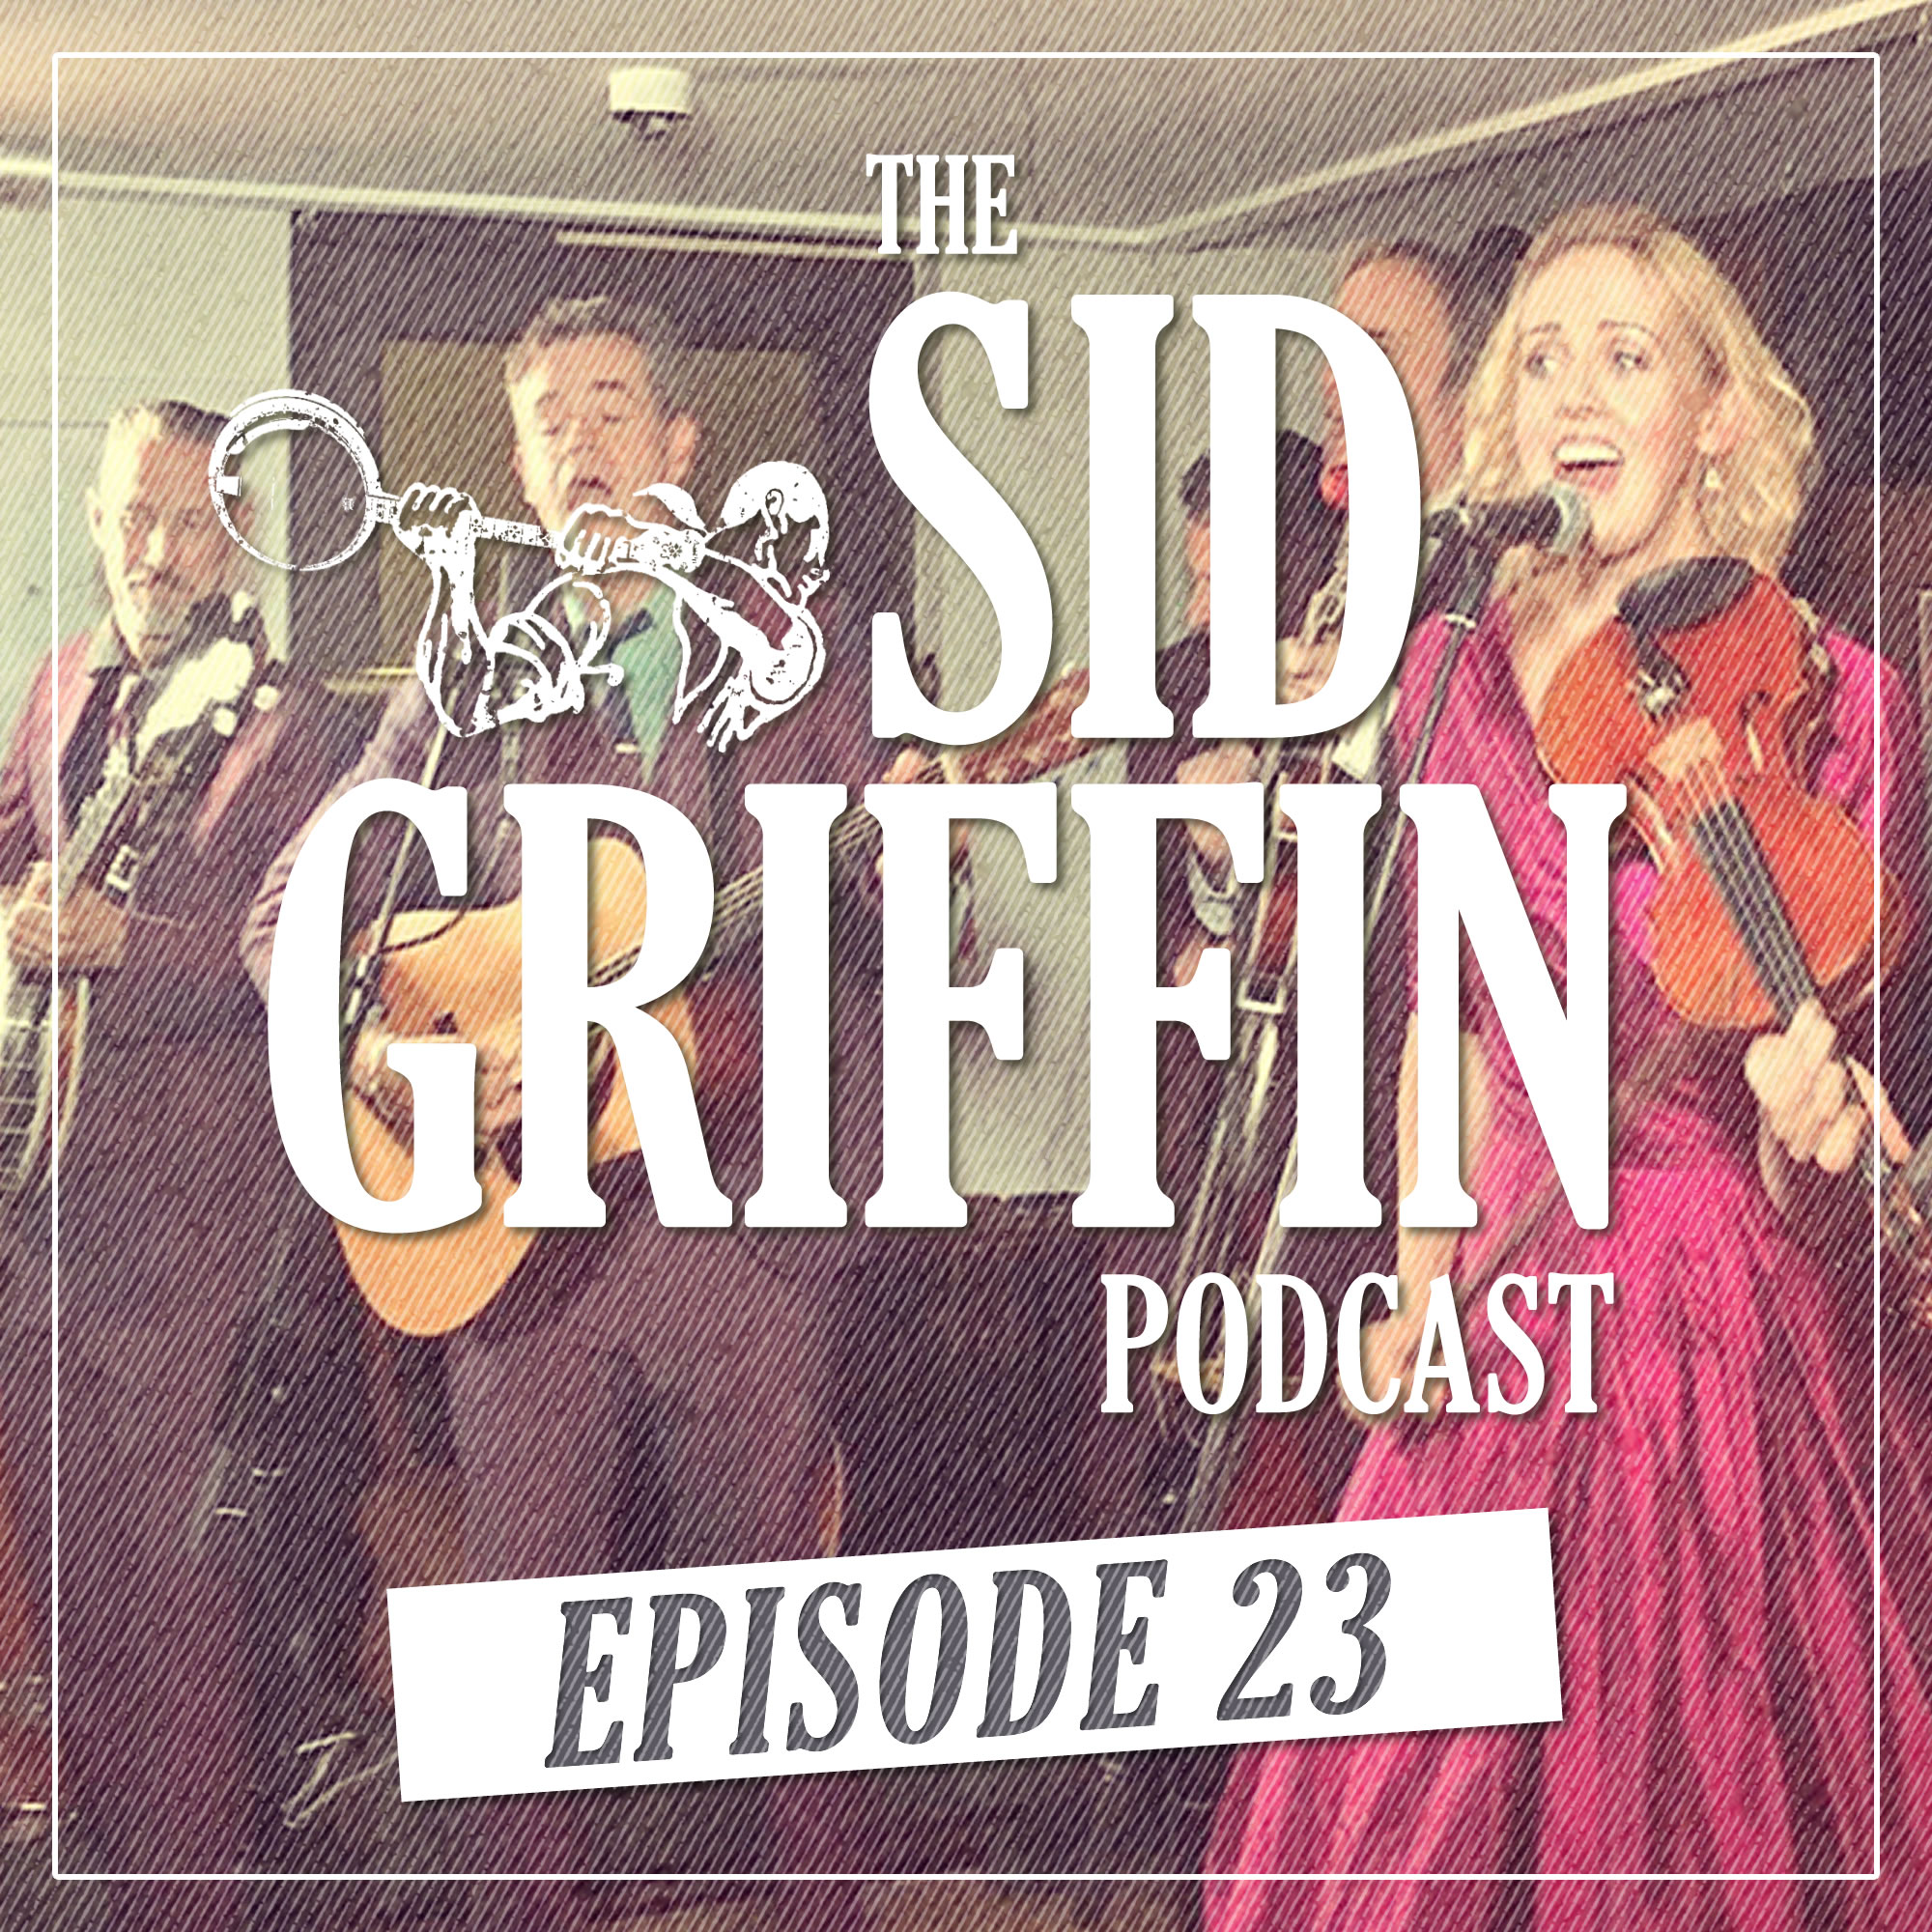 The Sid Griffin Podcast - Call All Coal Porters - Show 23